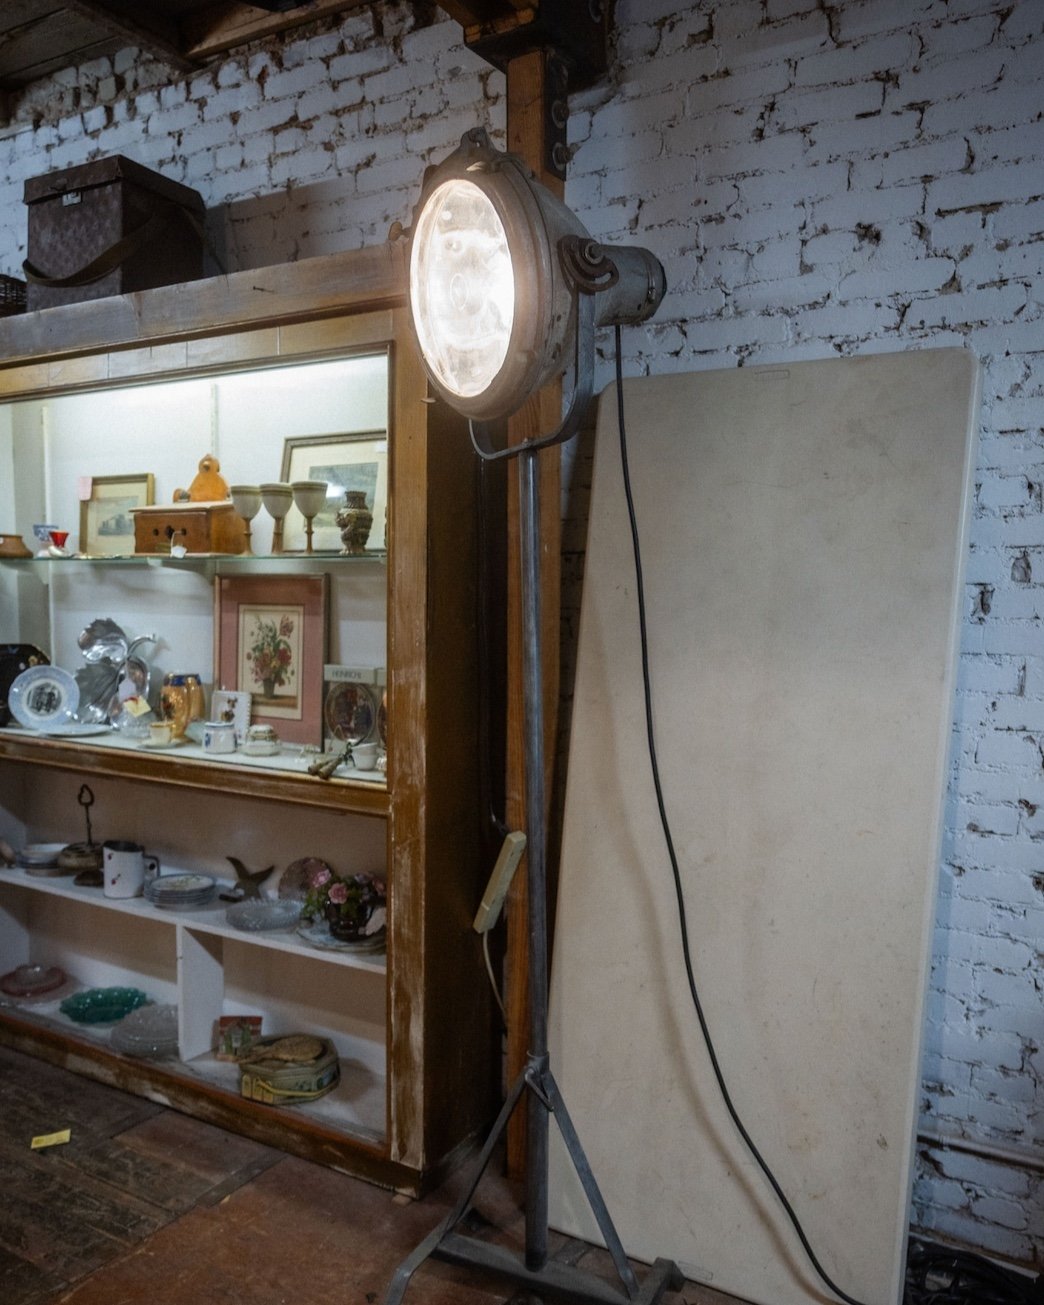 If you love #IndustrialDecor then you&rsquo;ve come to the right place. ✨ Where would you put this #vintage light? Tell us in the comments! 👇